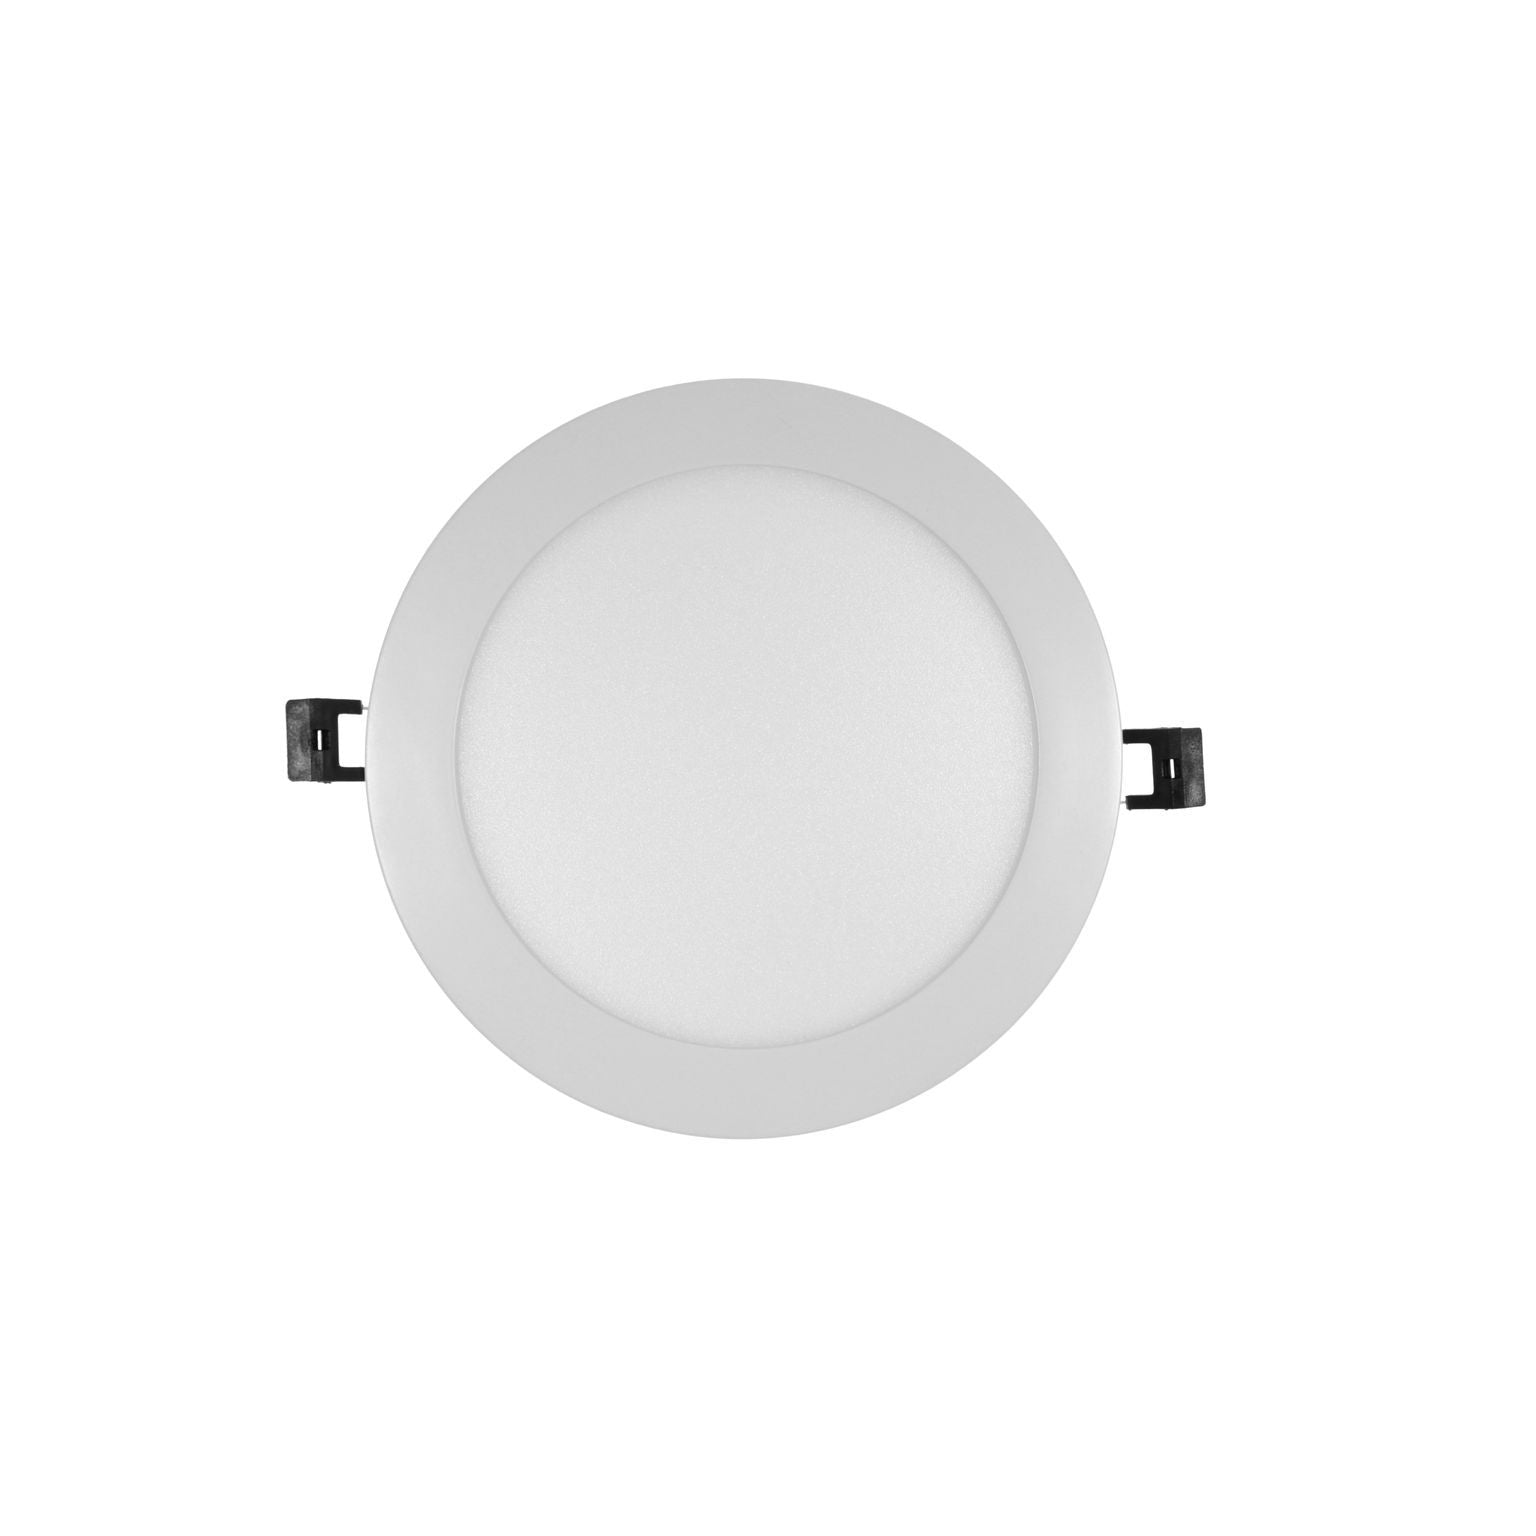 Luminiz 8'' Potlight, Single Color,5000K, junction box included with quick connect. Energy Star, ETL listed. Available in White, Black and Nickel Trim.